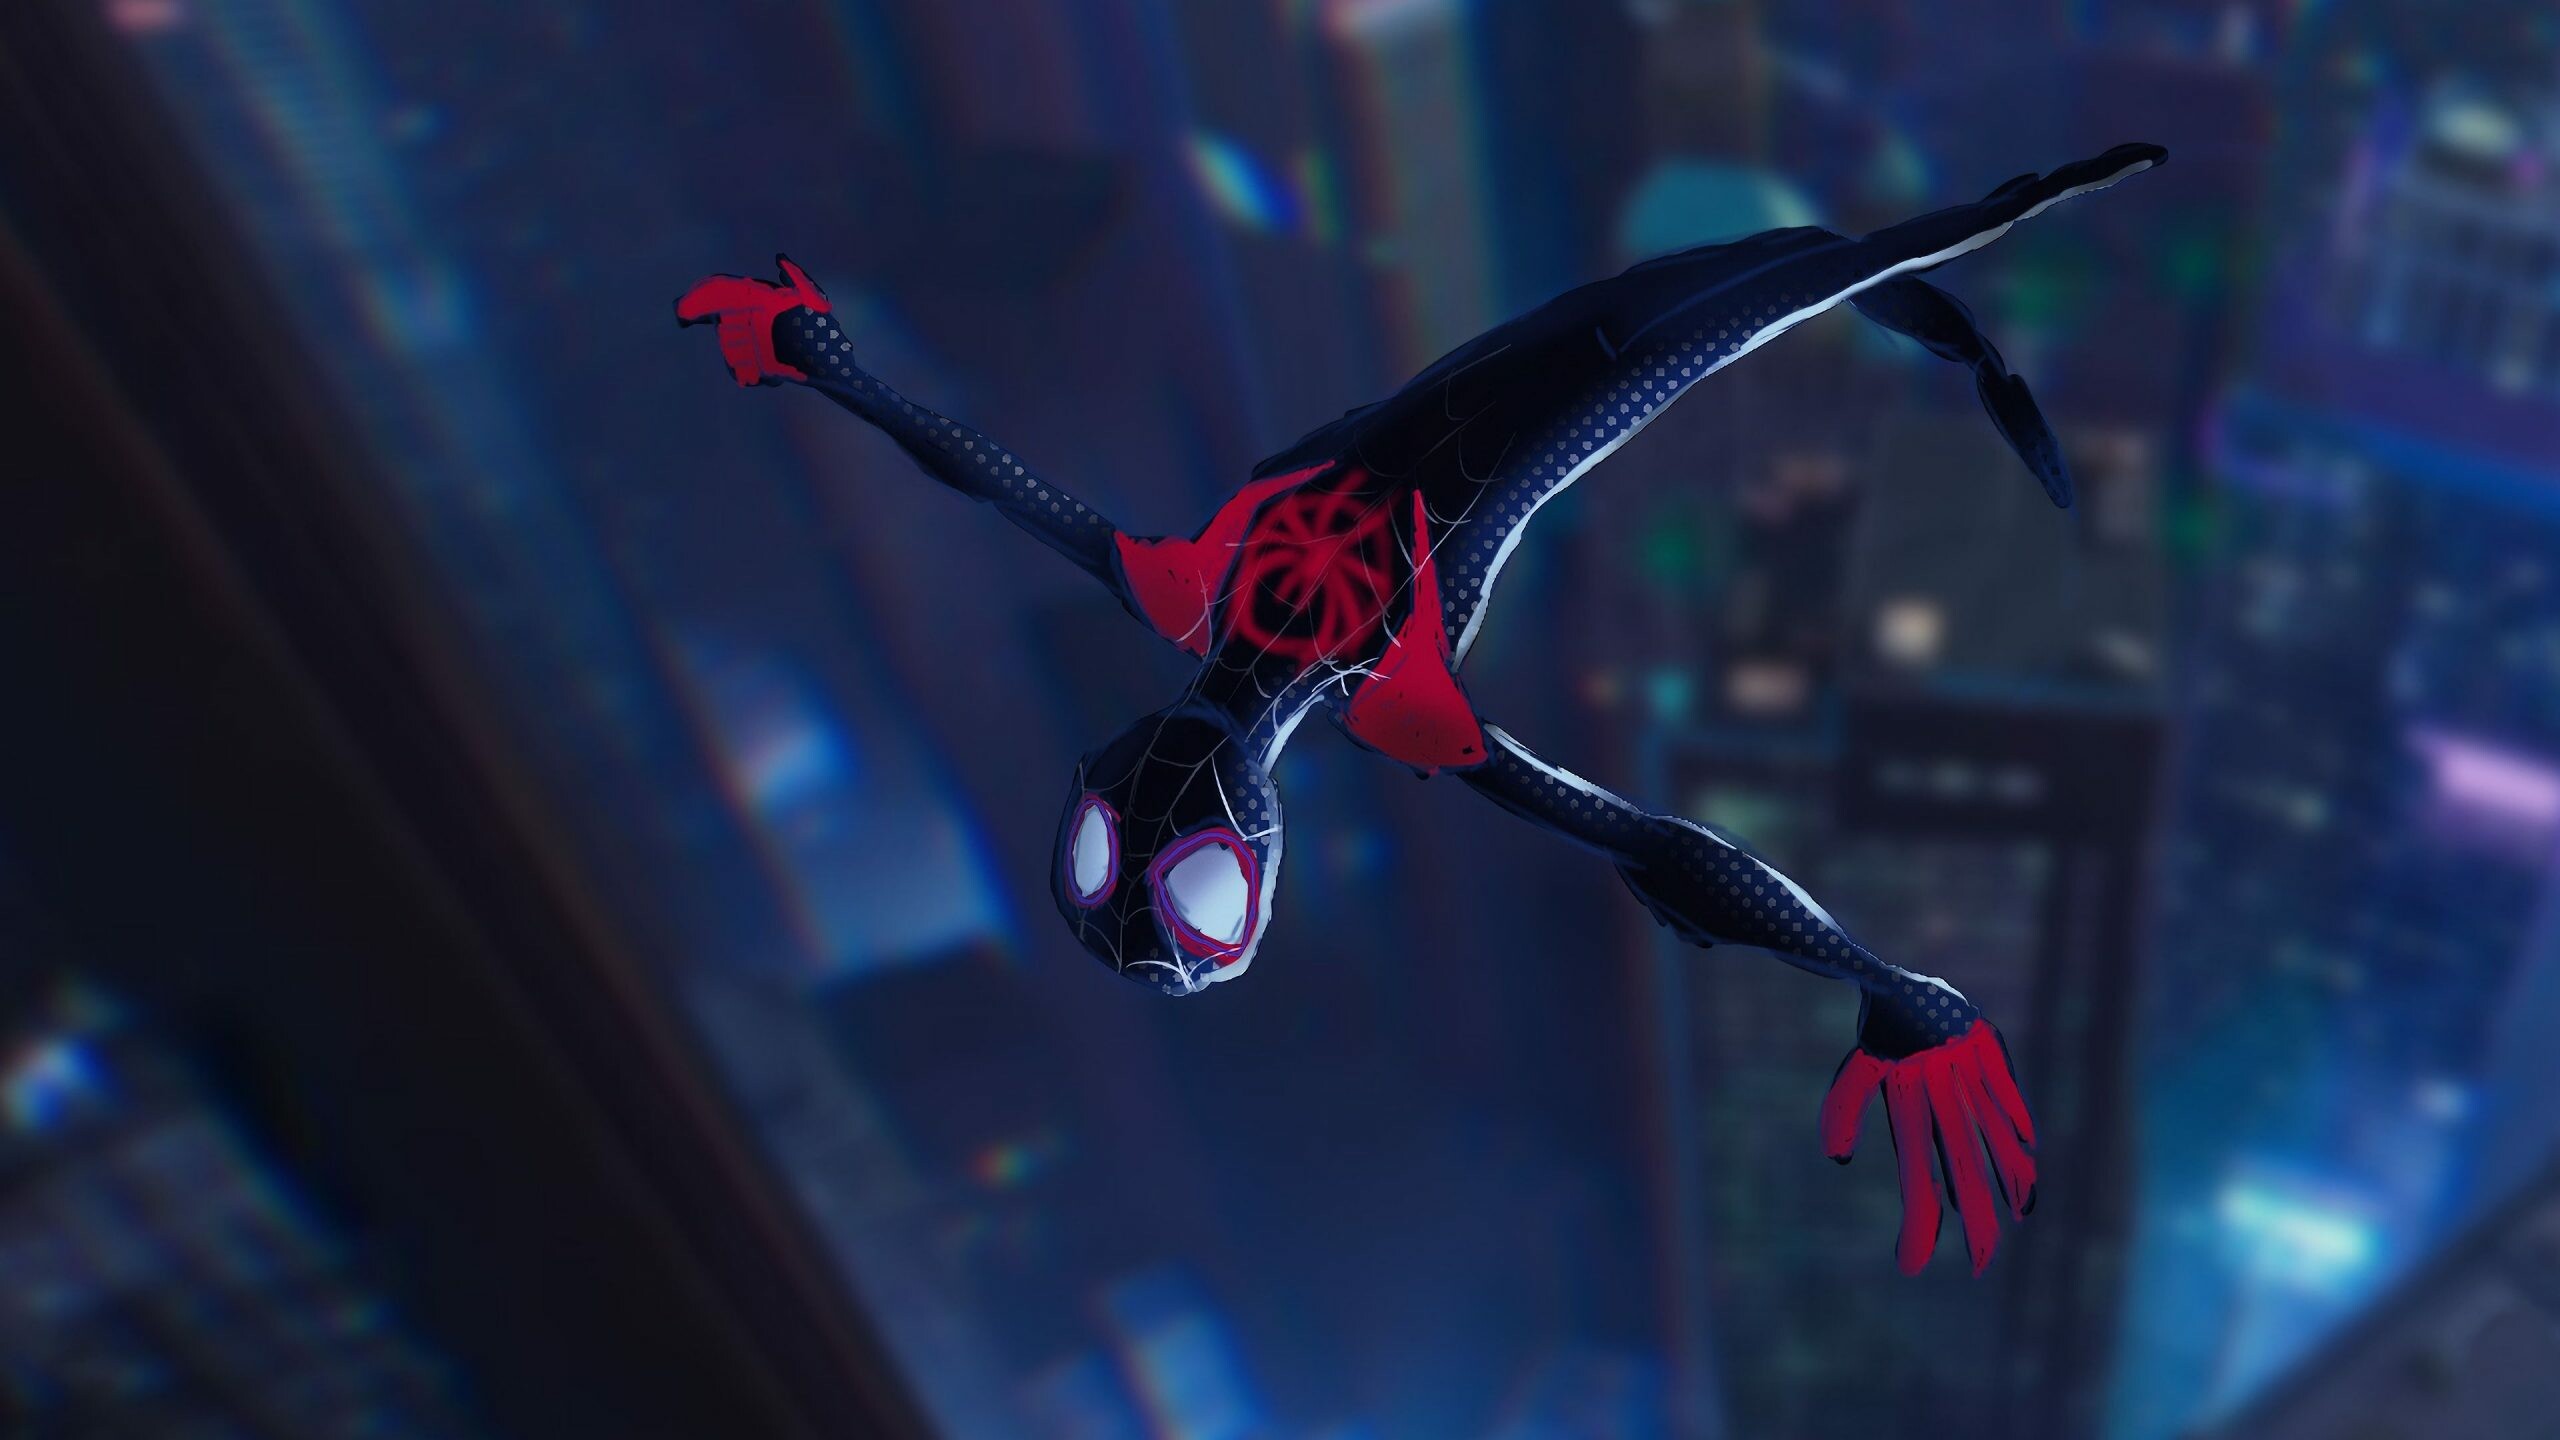 Spider-Man: Into the Spider-Verse: The 19th theatrical film produced by Sony Animation. 2560x1440 HD Wallpaper.